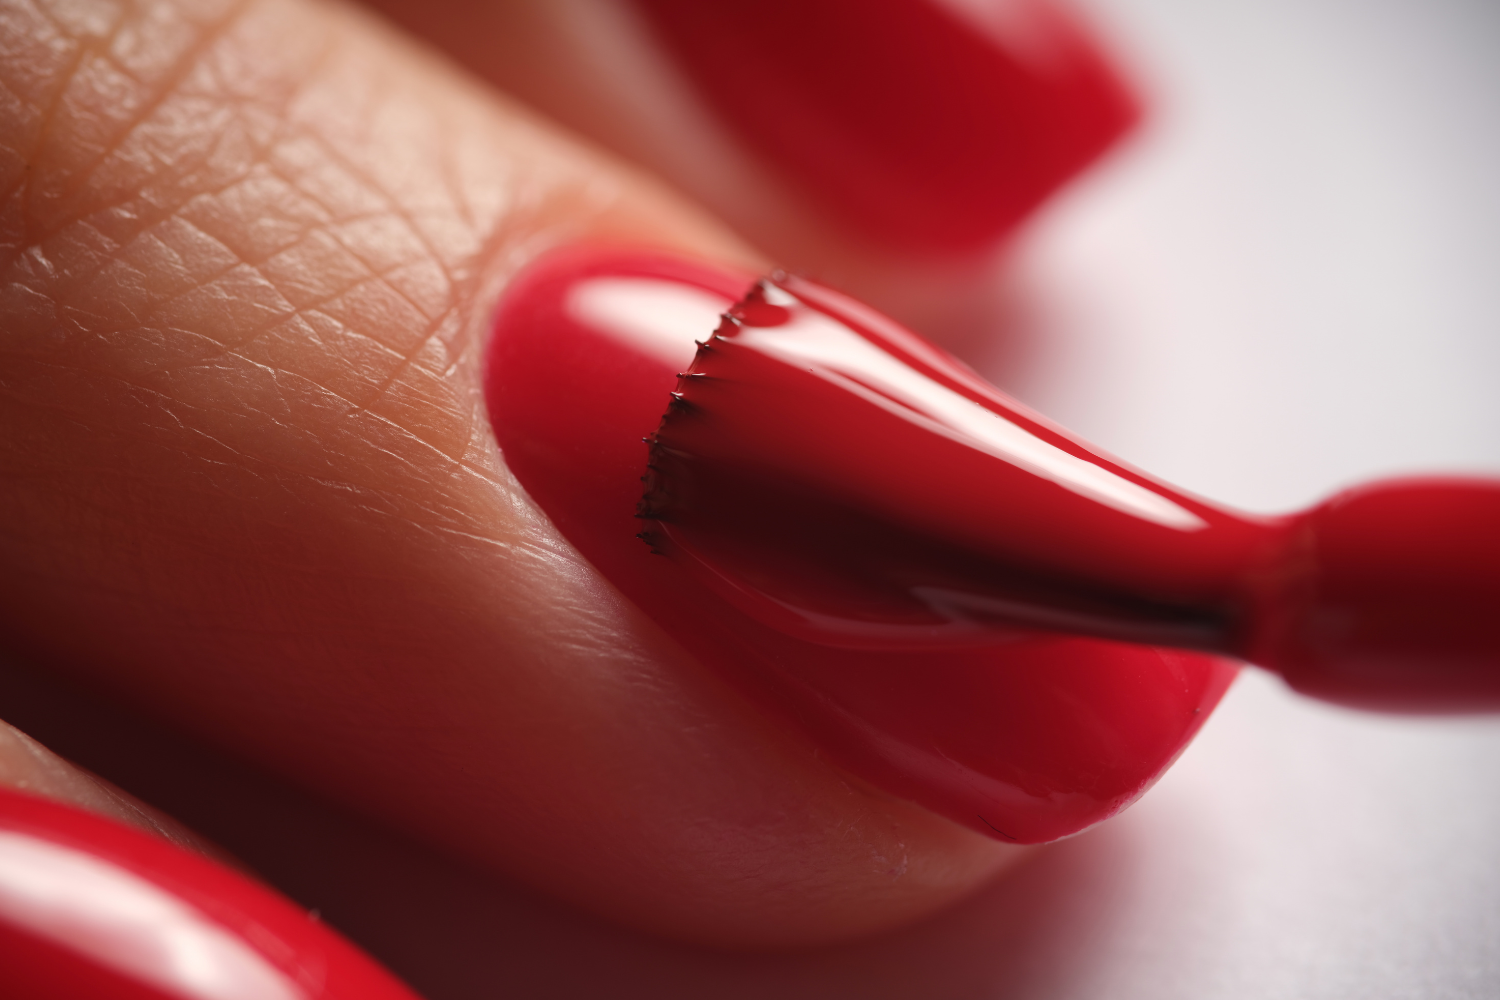 10 Nail Polish Hacks You Need to Know to Flaunt Those Colorful Nails